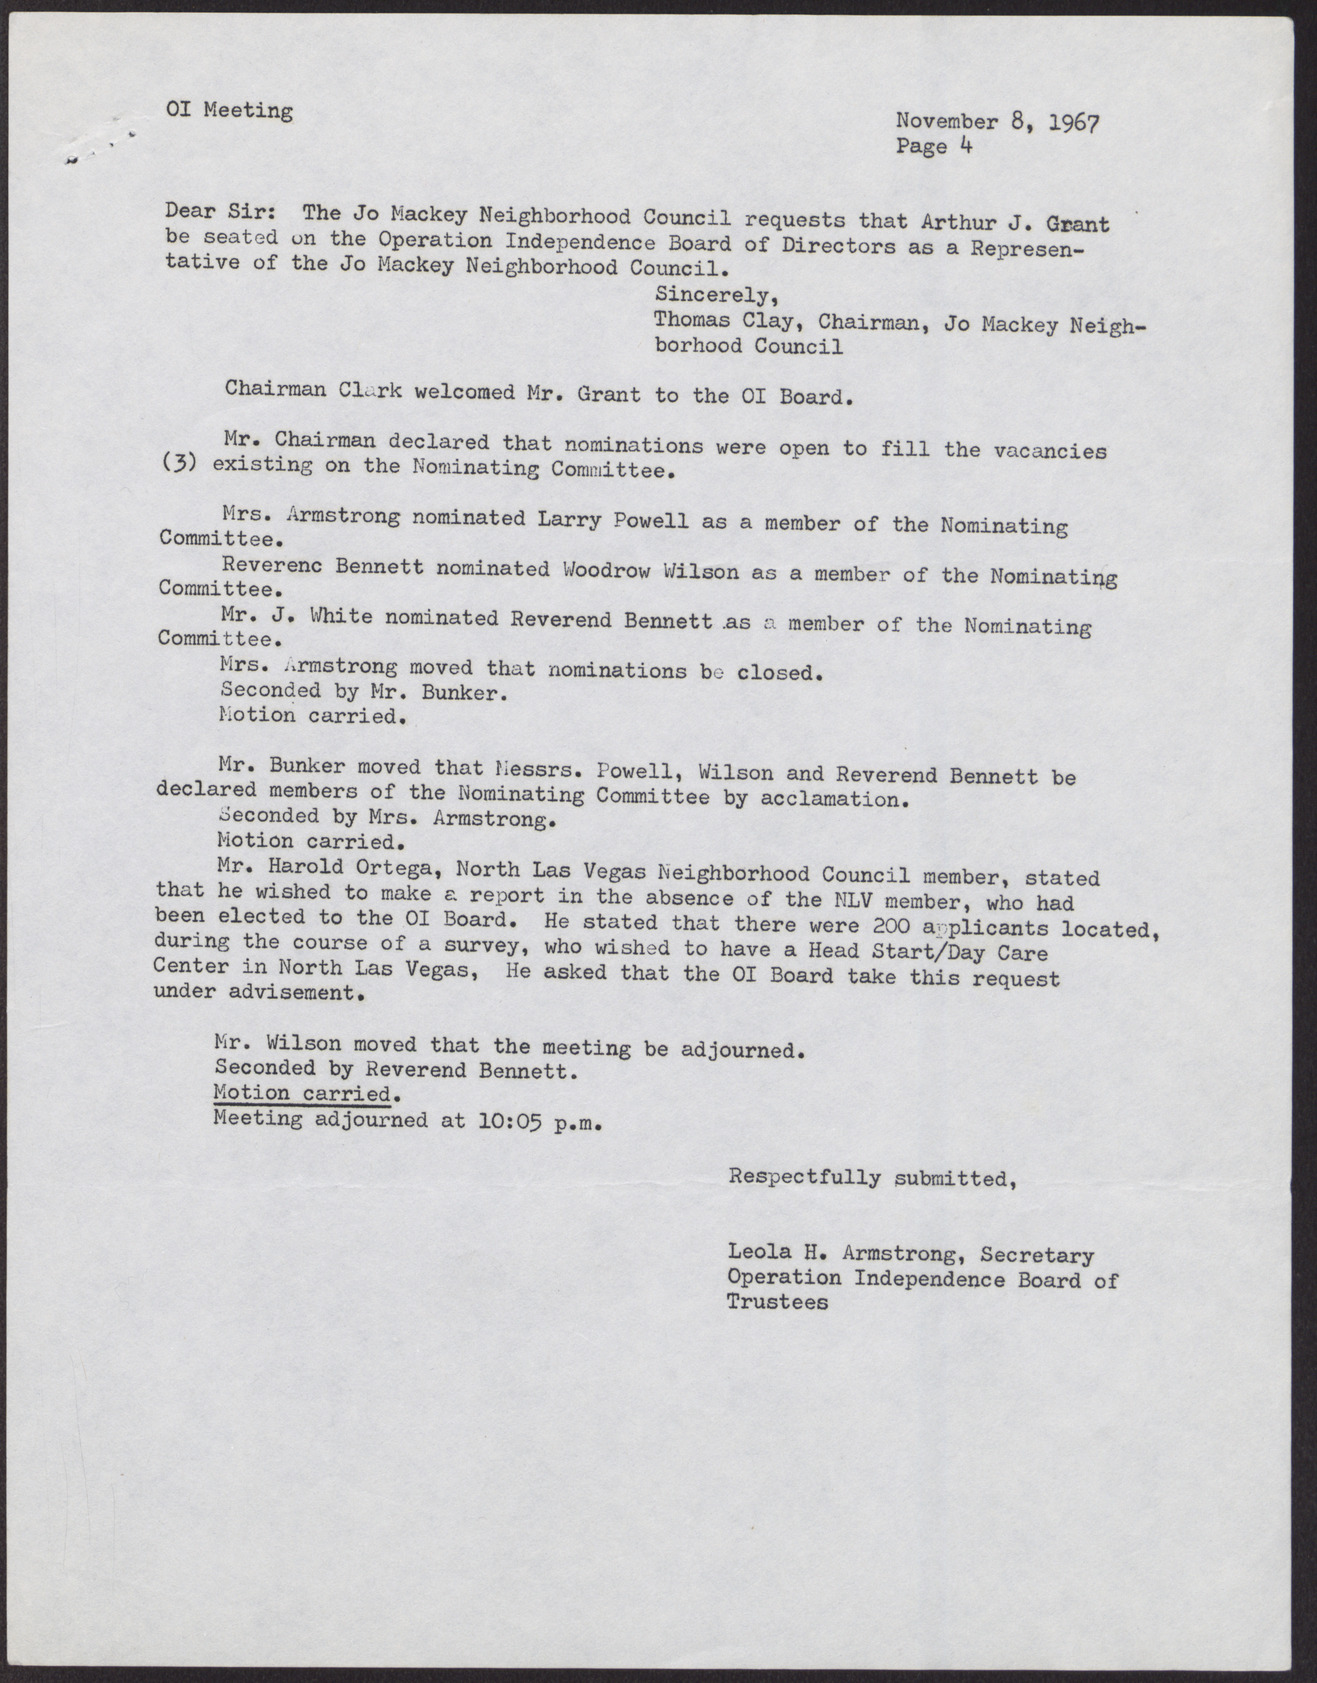 Minutes from Operation Independence Regular Board Meeting (4 pages), November 8, 1967, page 4